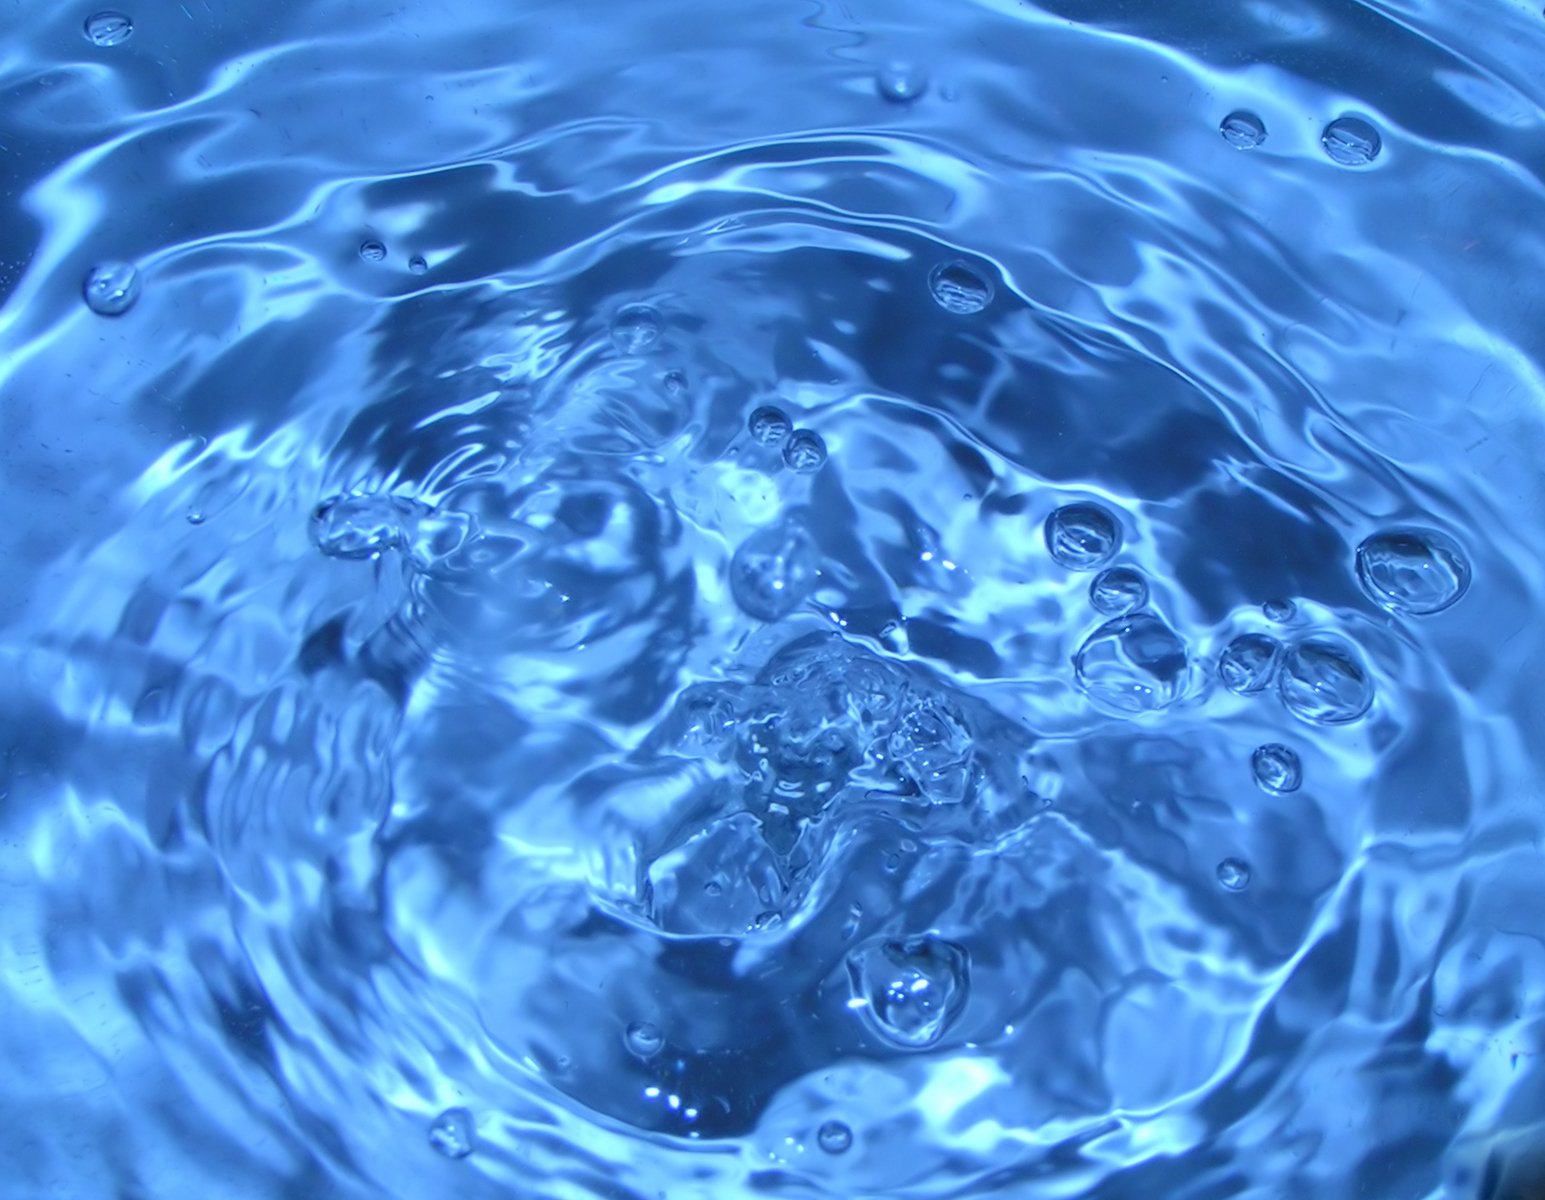 the top view of a blue water surface with bubbles